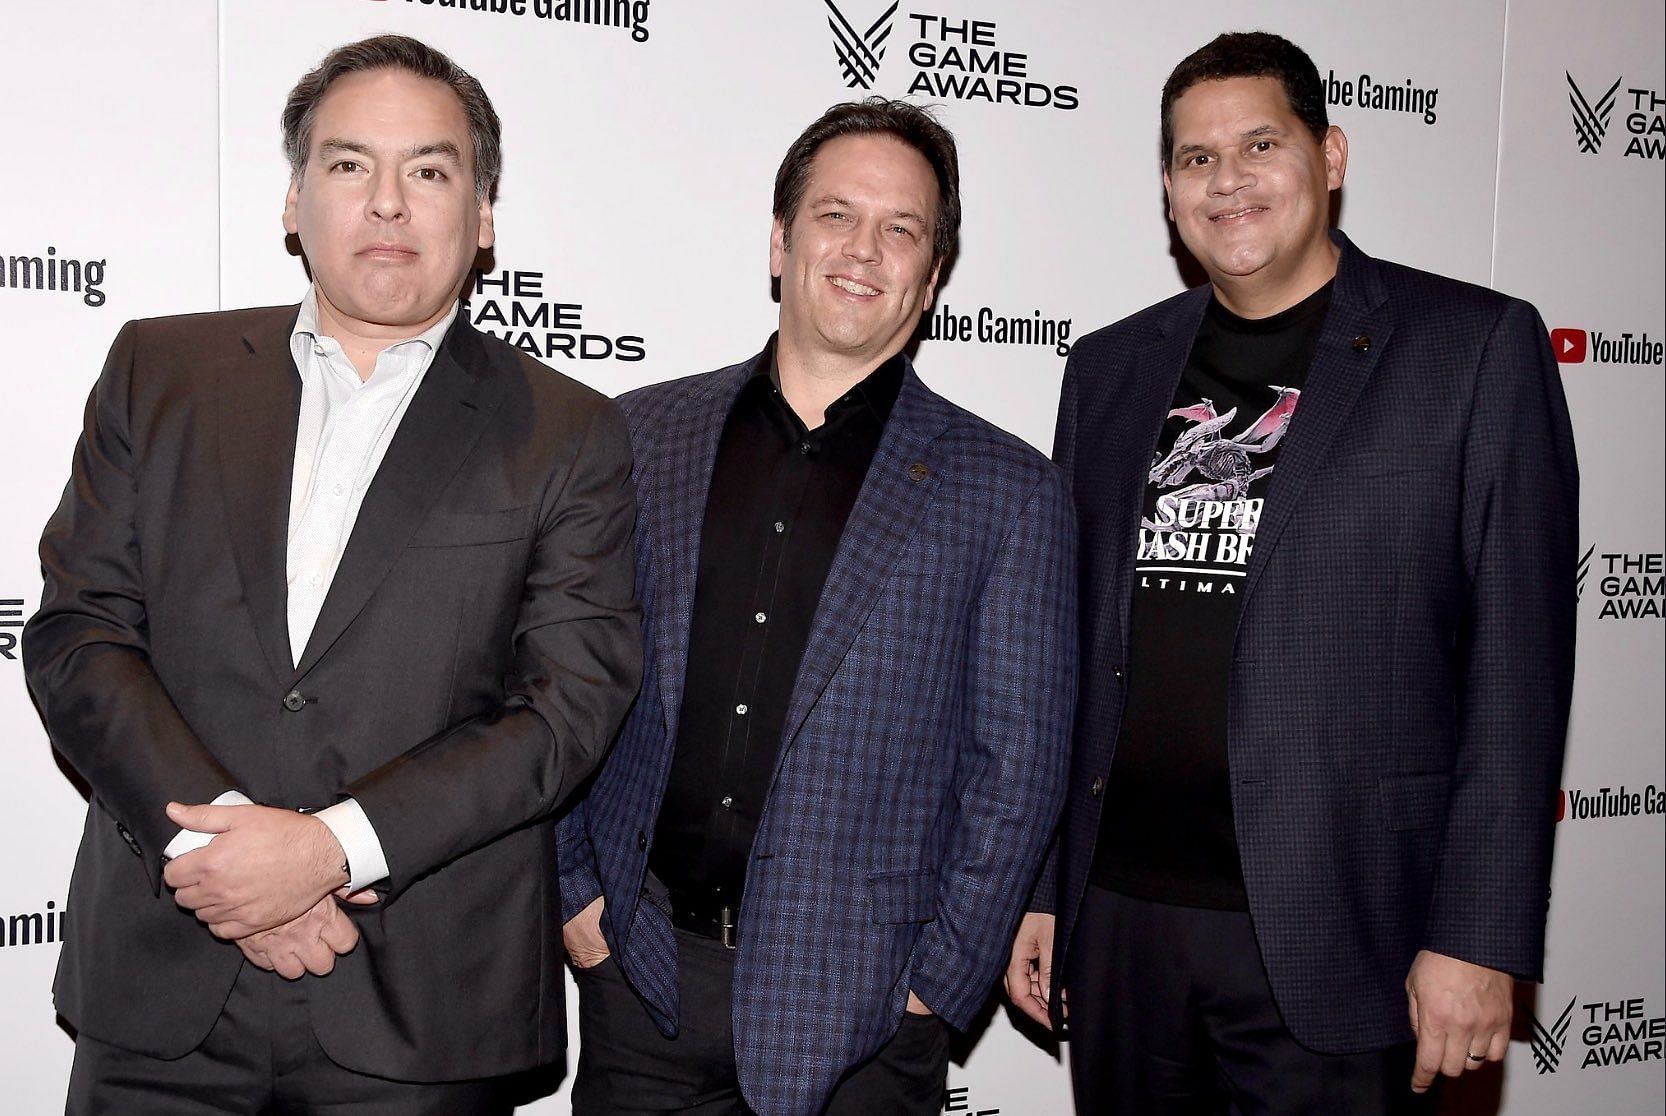 Shawn Layden, Phil Spencer, and Reggie Fils-Aime at the Game Awards (Image via Nintendo)